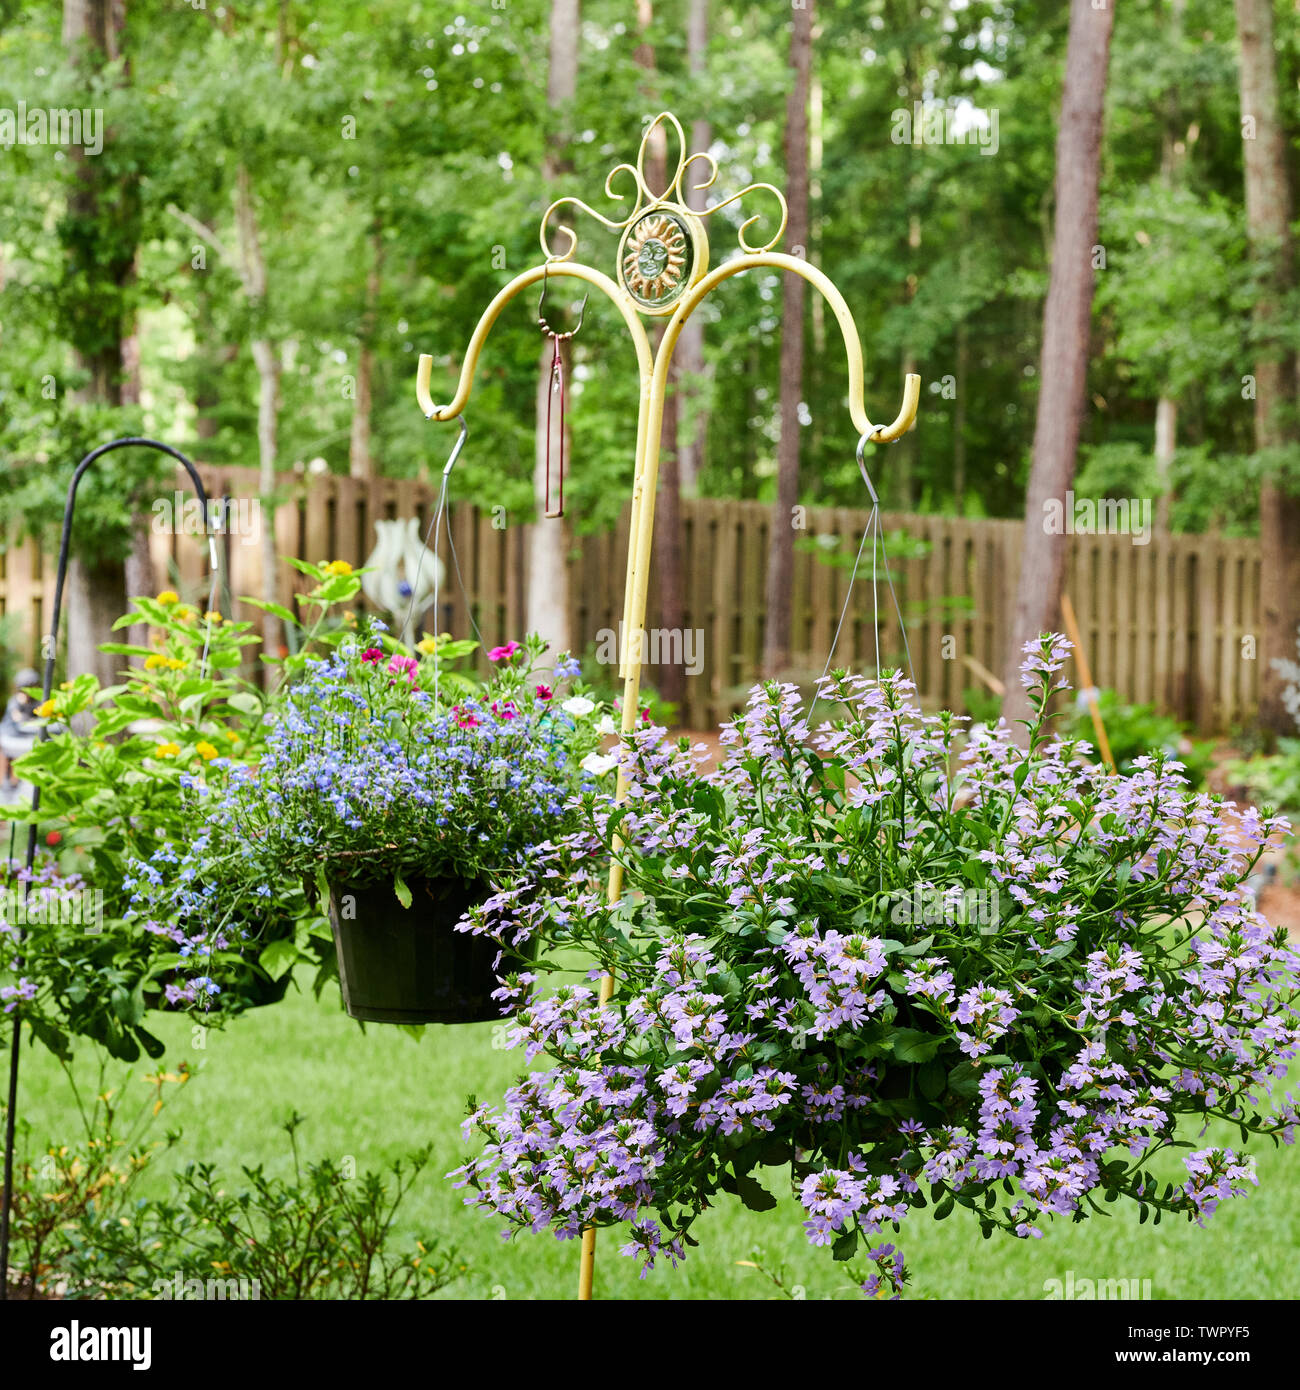 Hanging flower baskets in a home garden with various flowering plants. Stock Photo